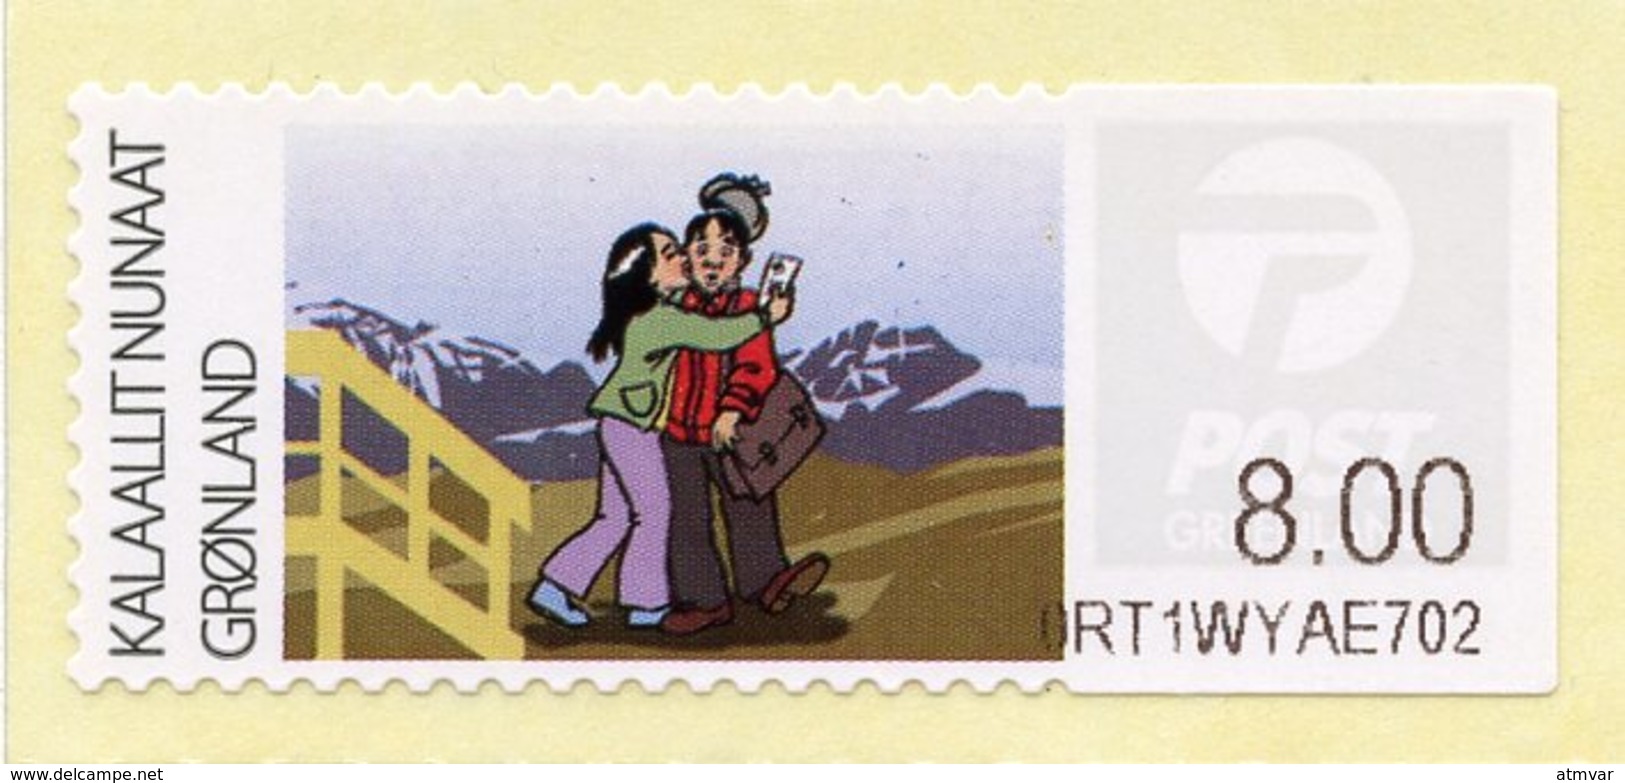 GREENLAND / GROENLAND (2009) - ATM - Receiving A Letter, Post, Postmen, Delivery, Facteur - Machine Stamps